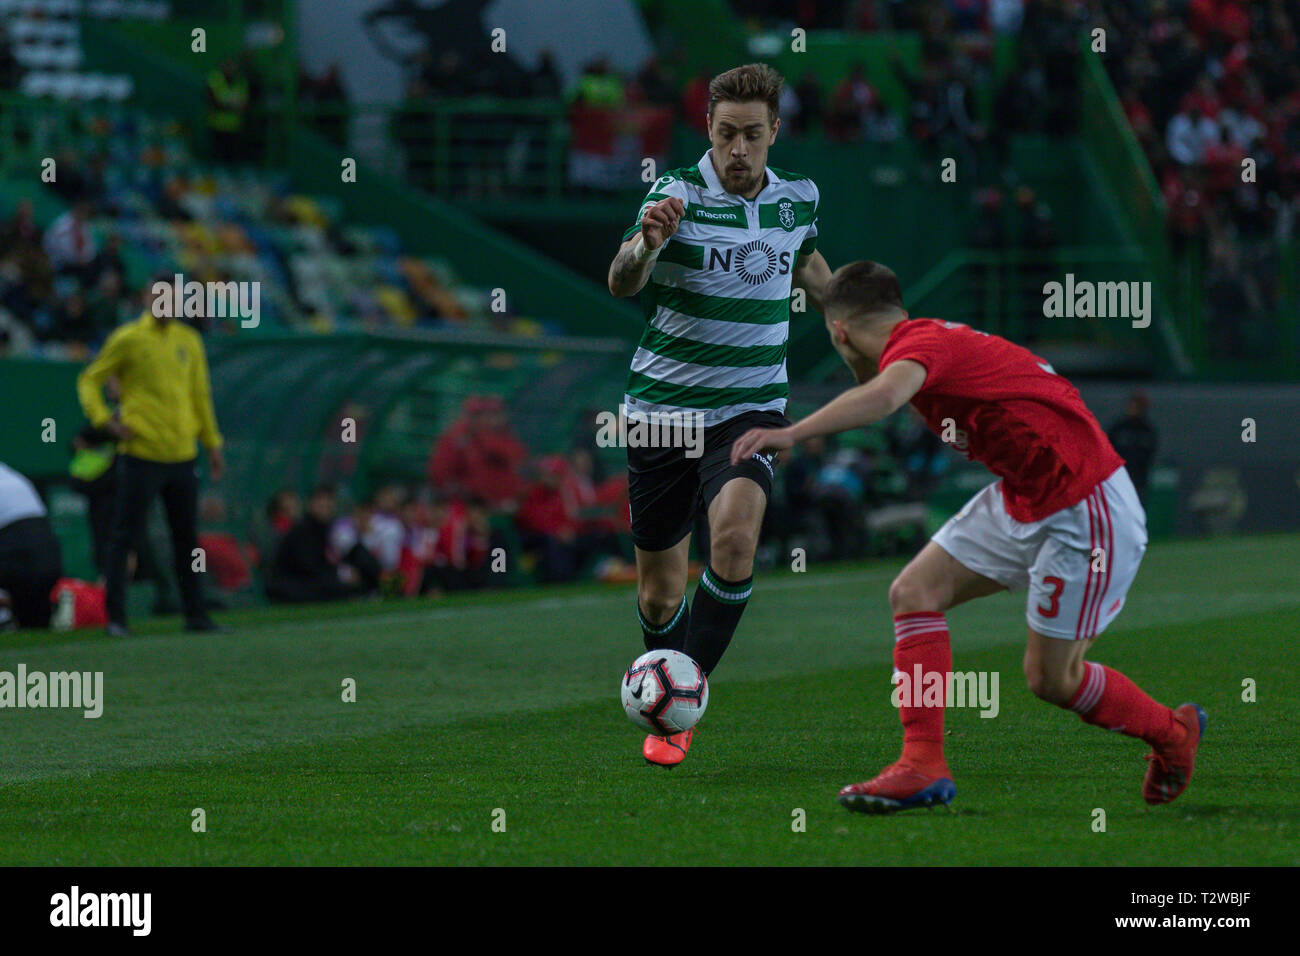 April 03, 2019. Lisbon, Portugal. Sporting's defender from Uruguay Sebastian Coates (4) in action during the game Sporting CP vs SL Benfica © Alexandre de Sousa/Alamy Live News Stock Photo